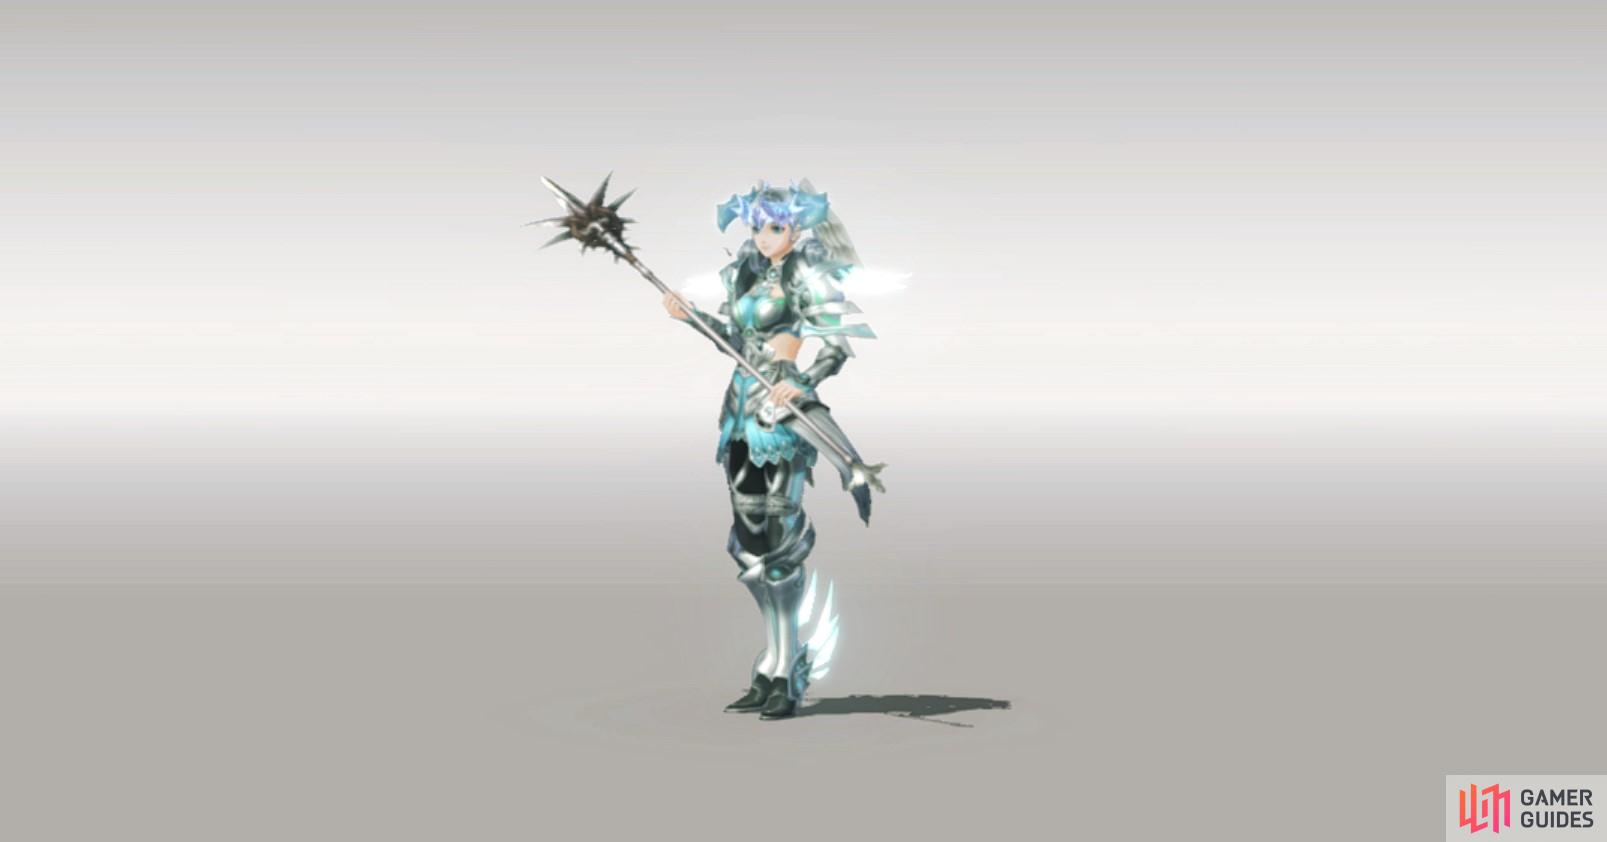 Melia wields the Dusk Staff in this photo.